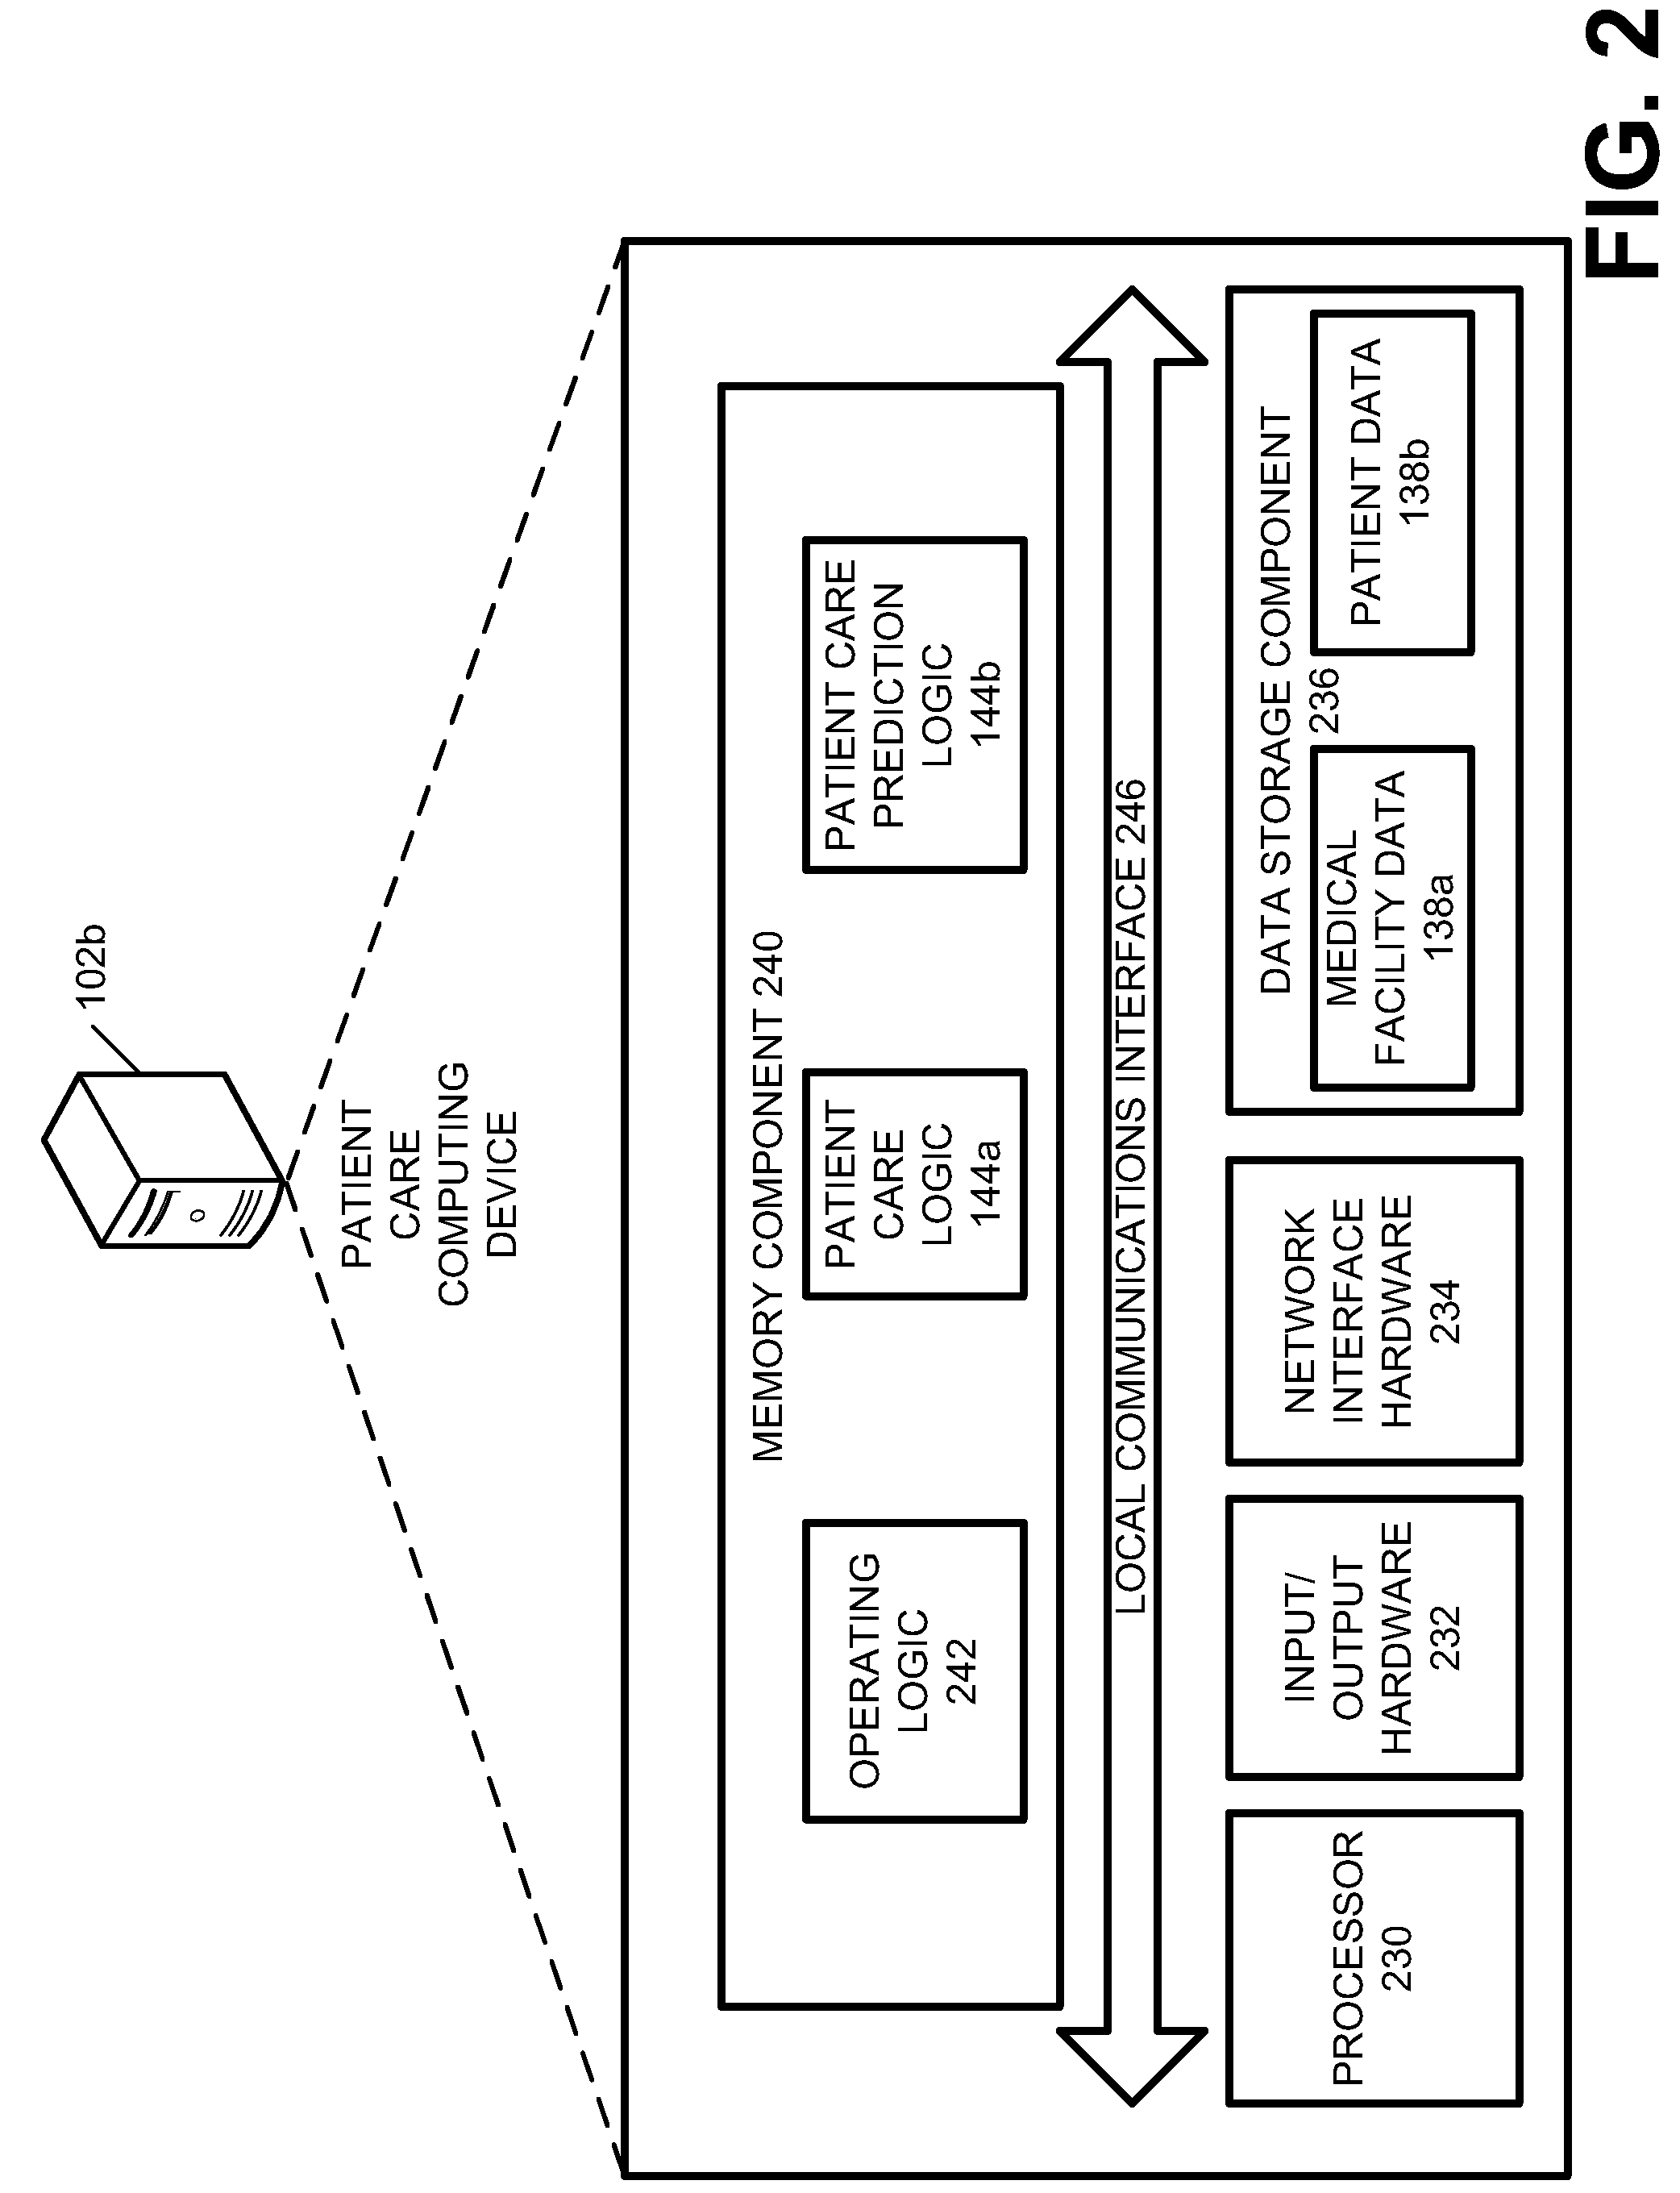 Systems and methods for providing a continuum of care